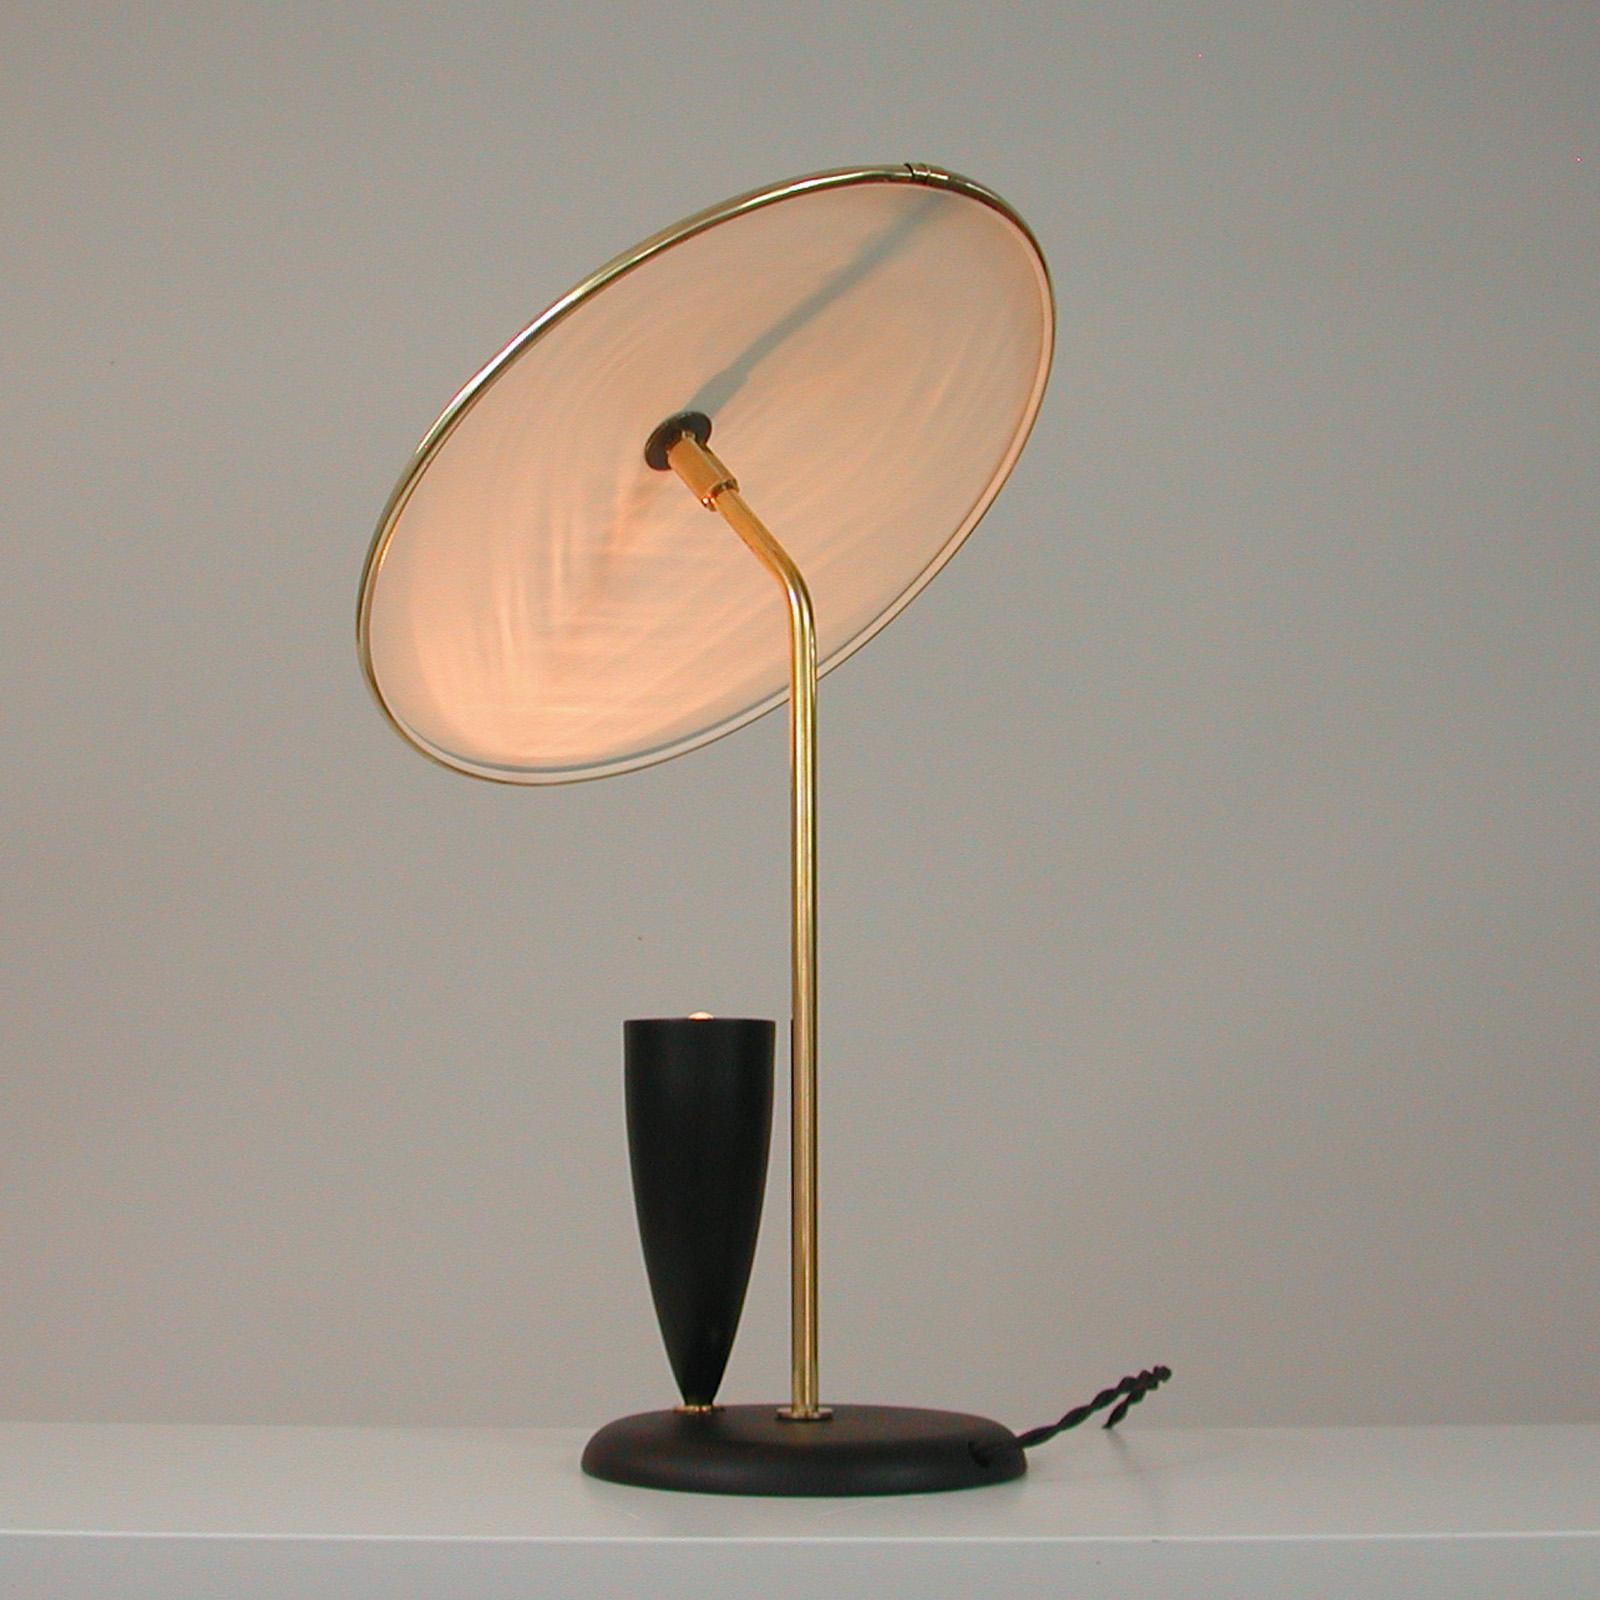 French Midcentury Reflecting Black and Brass Table Lamp, 1950s For Sale 5